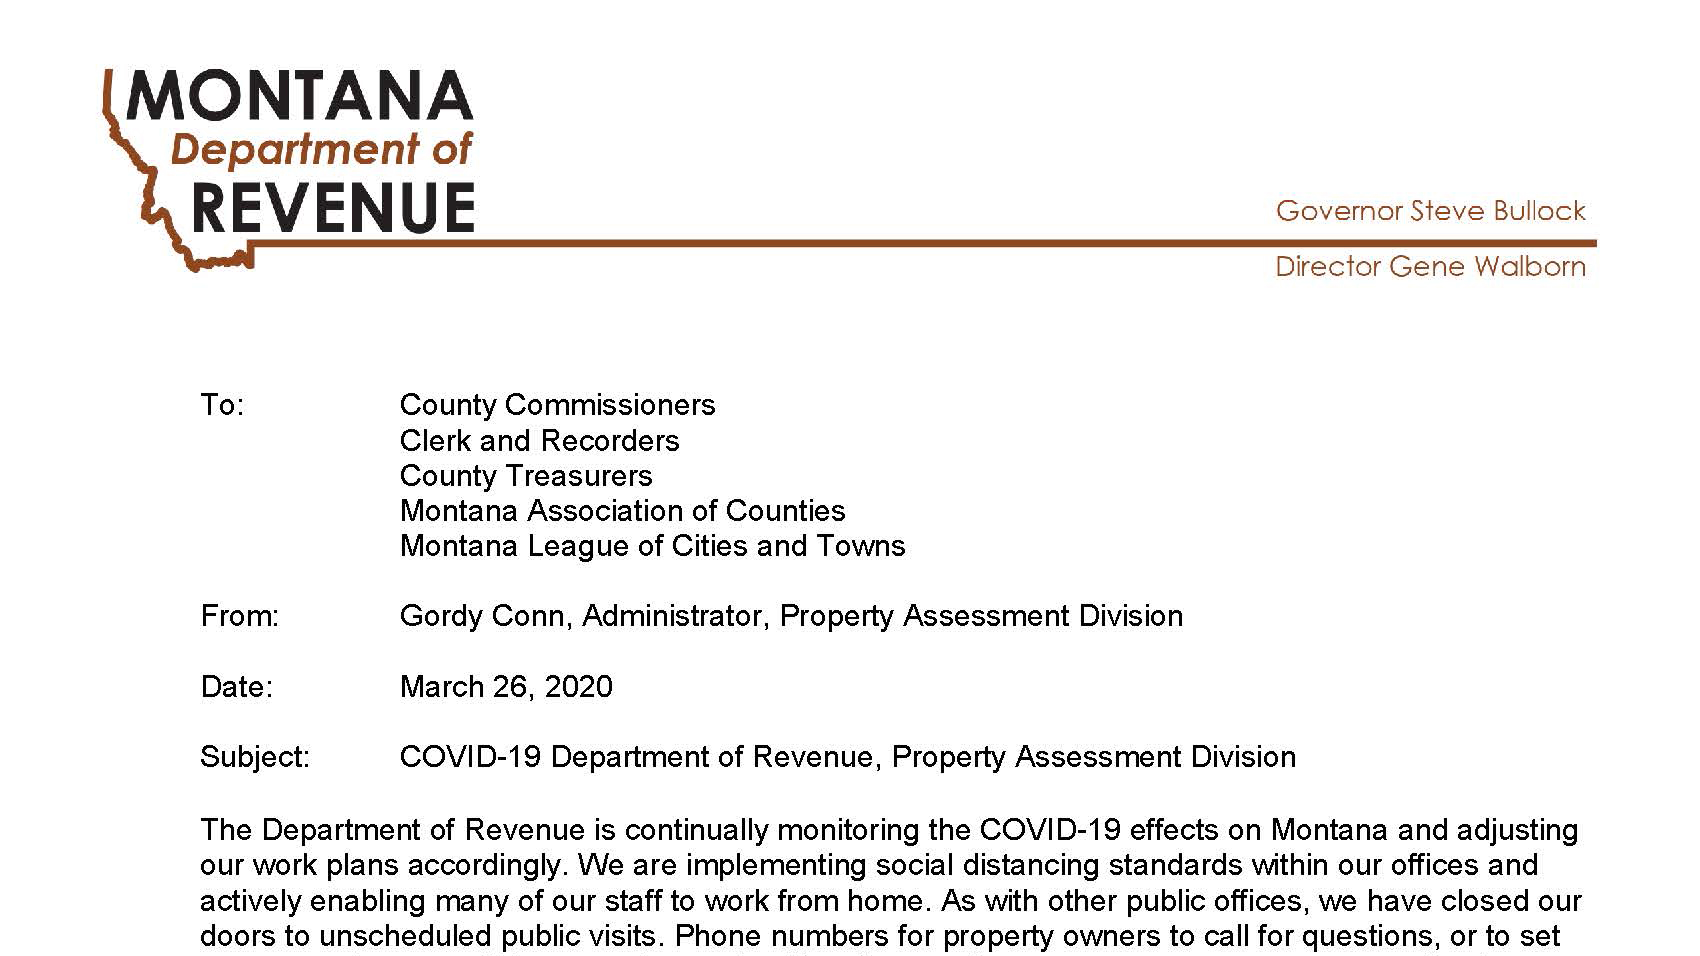 COVID-19 Impact on Property Assessment